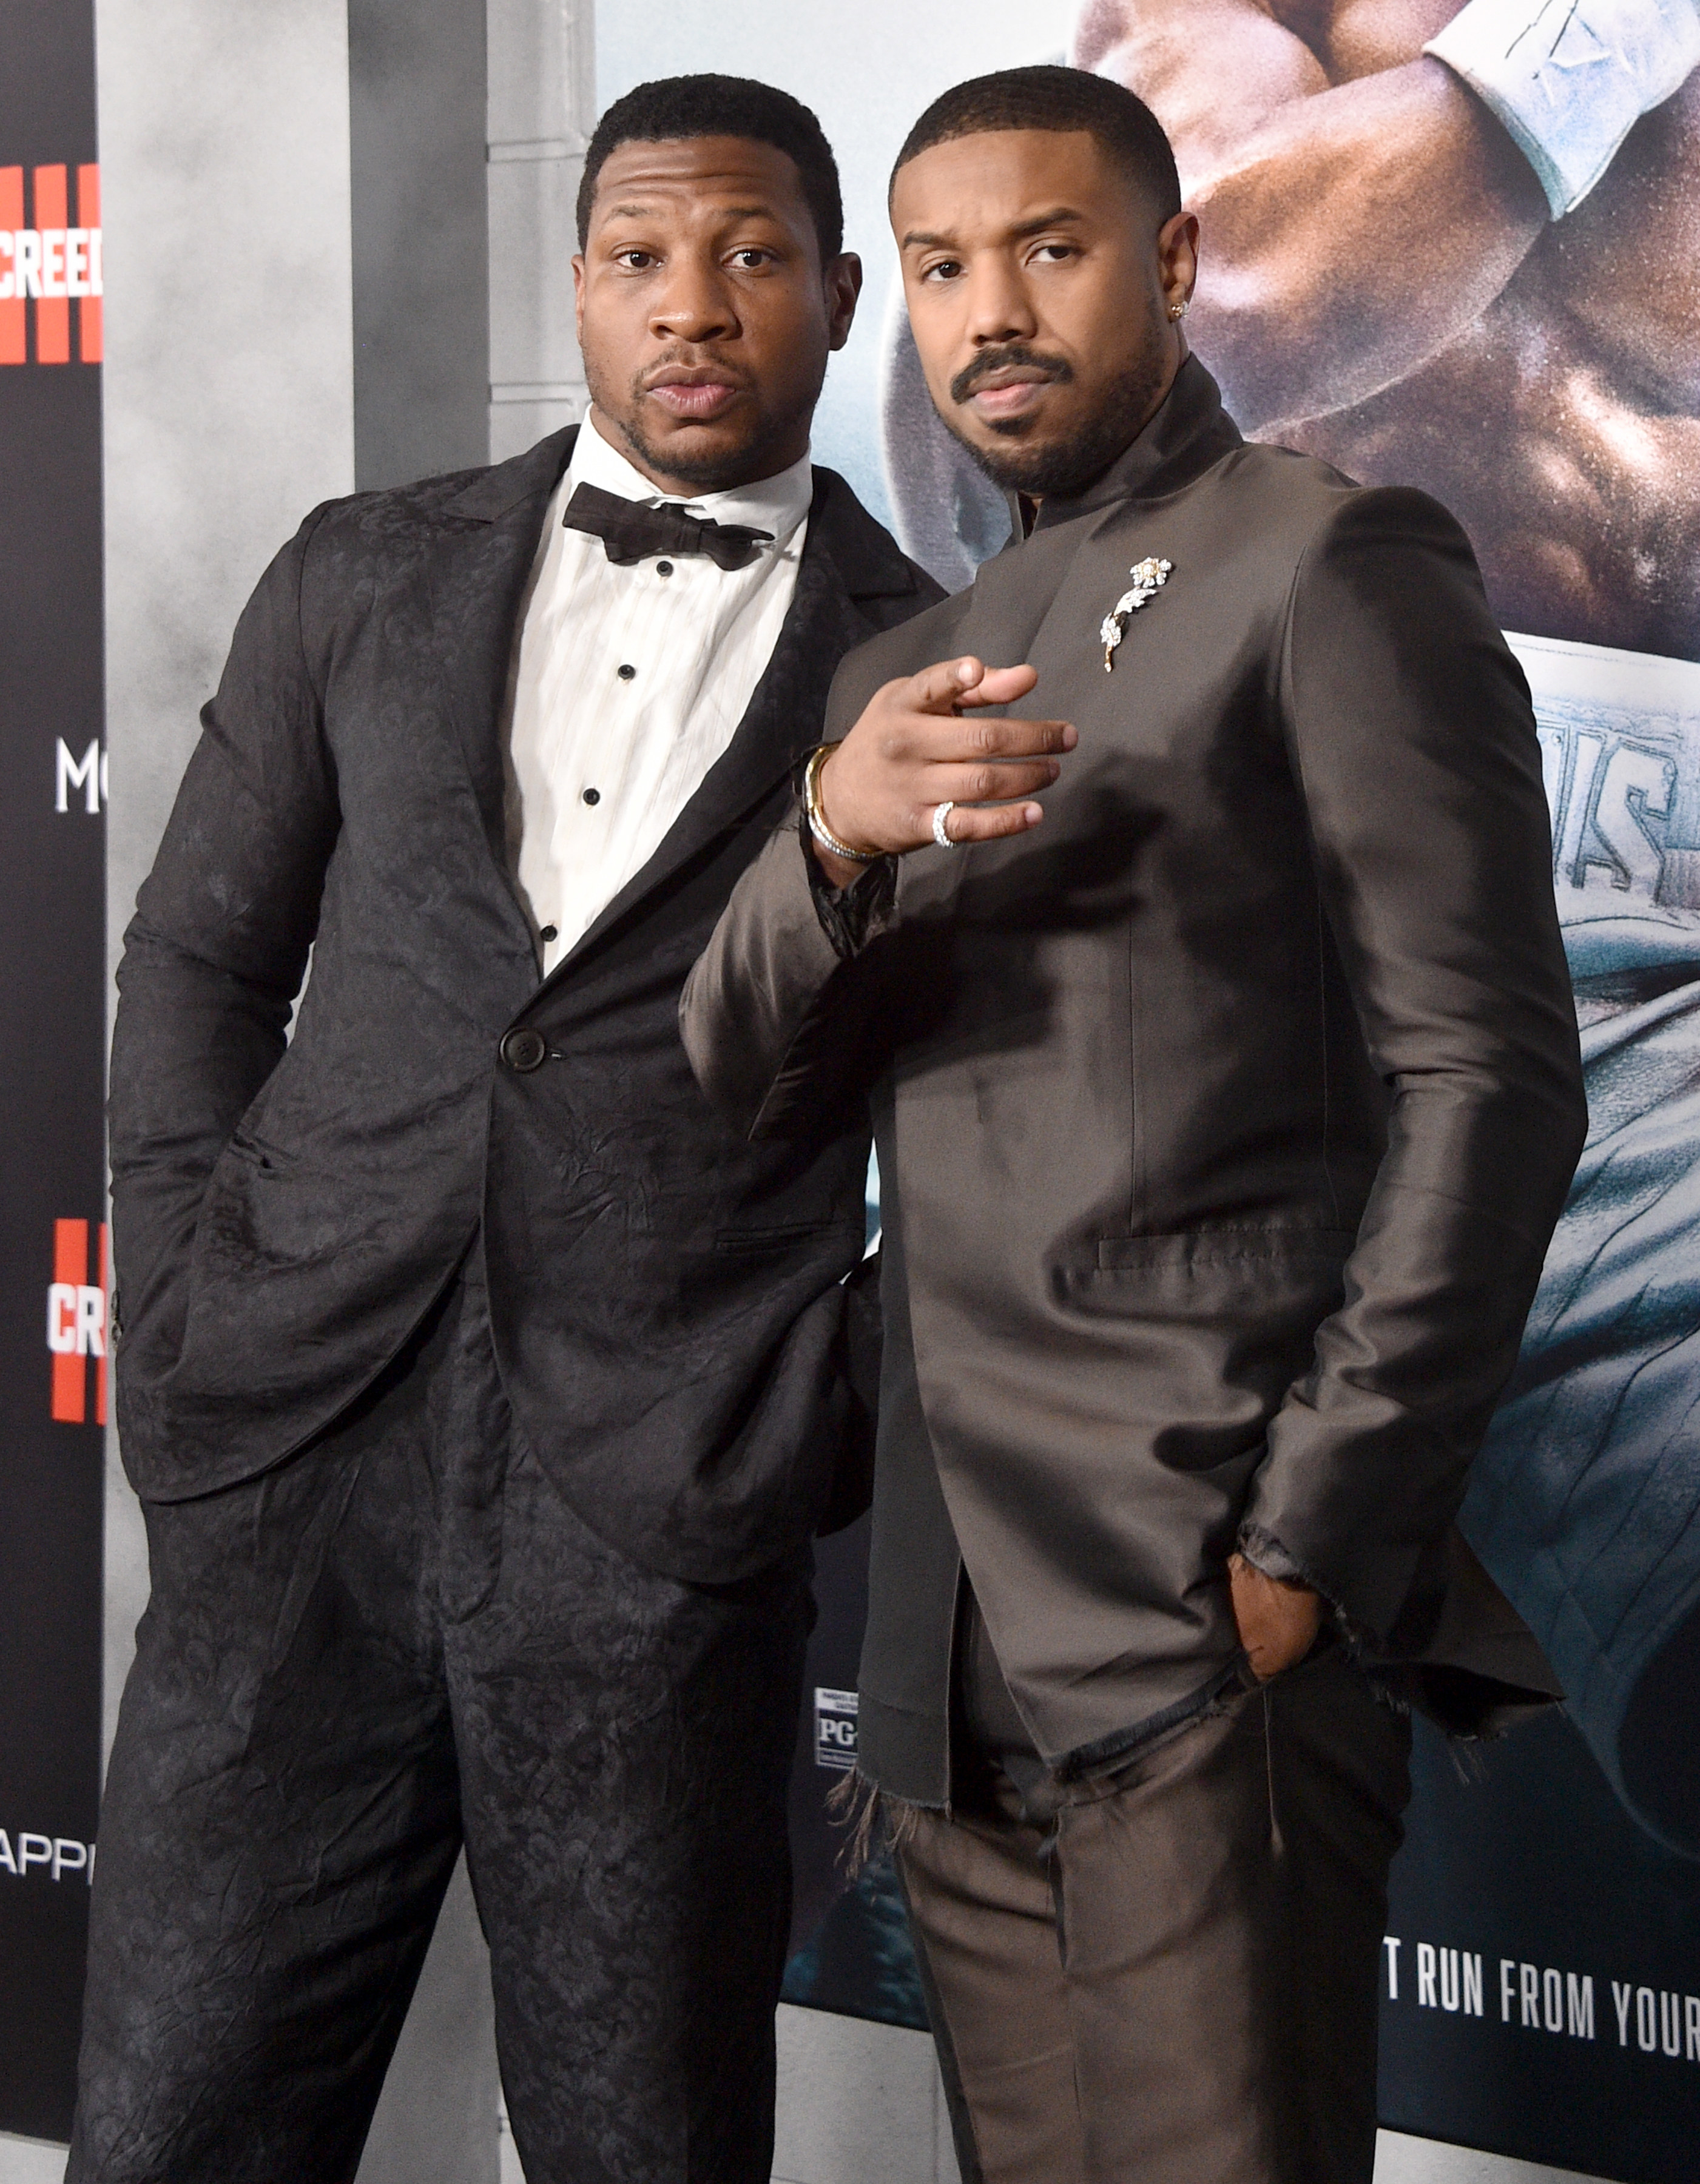 Jonathan Majors and Michael B. Jordan, who&#x27;s pointing at something offscreen, standing next to each other on the red carpet